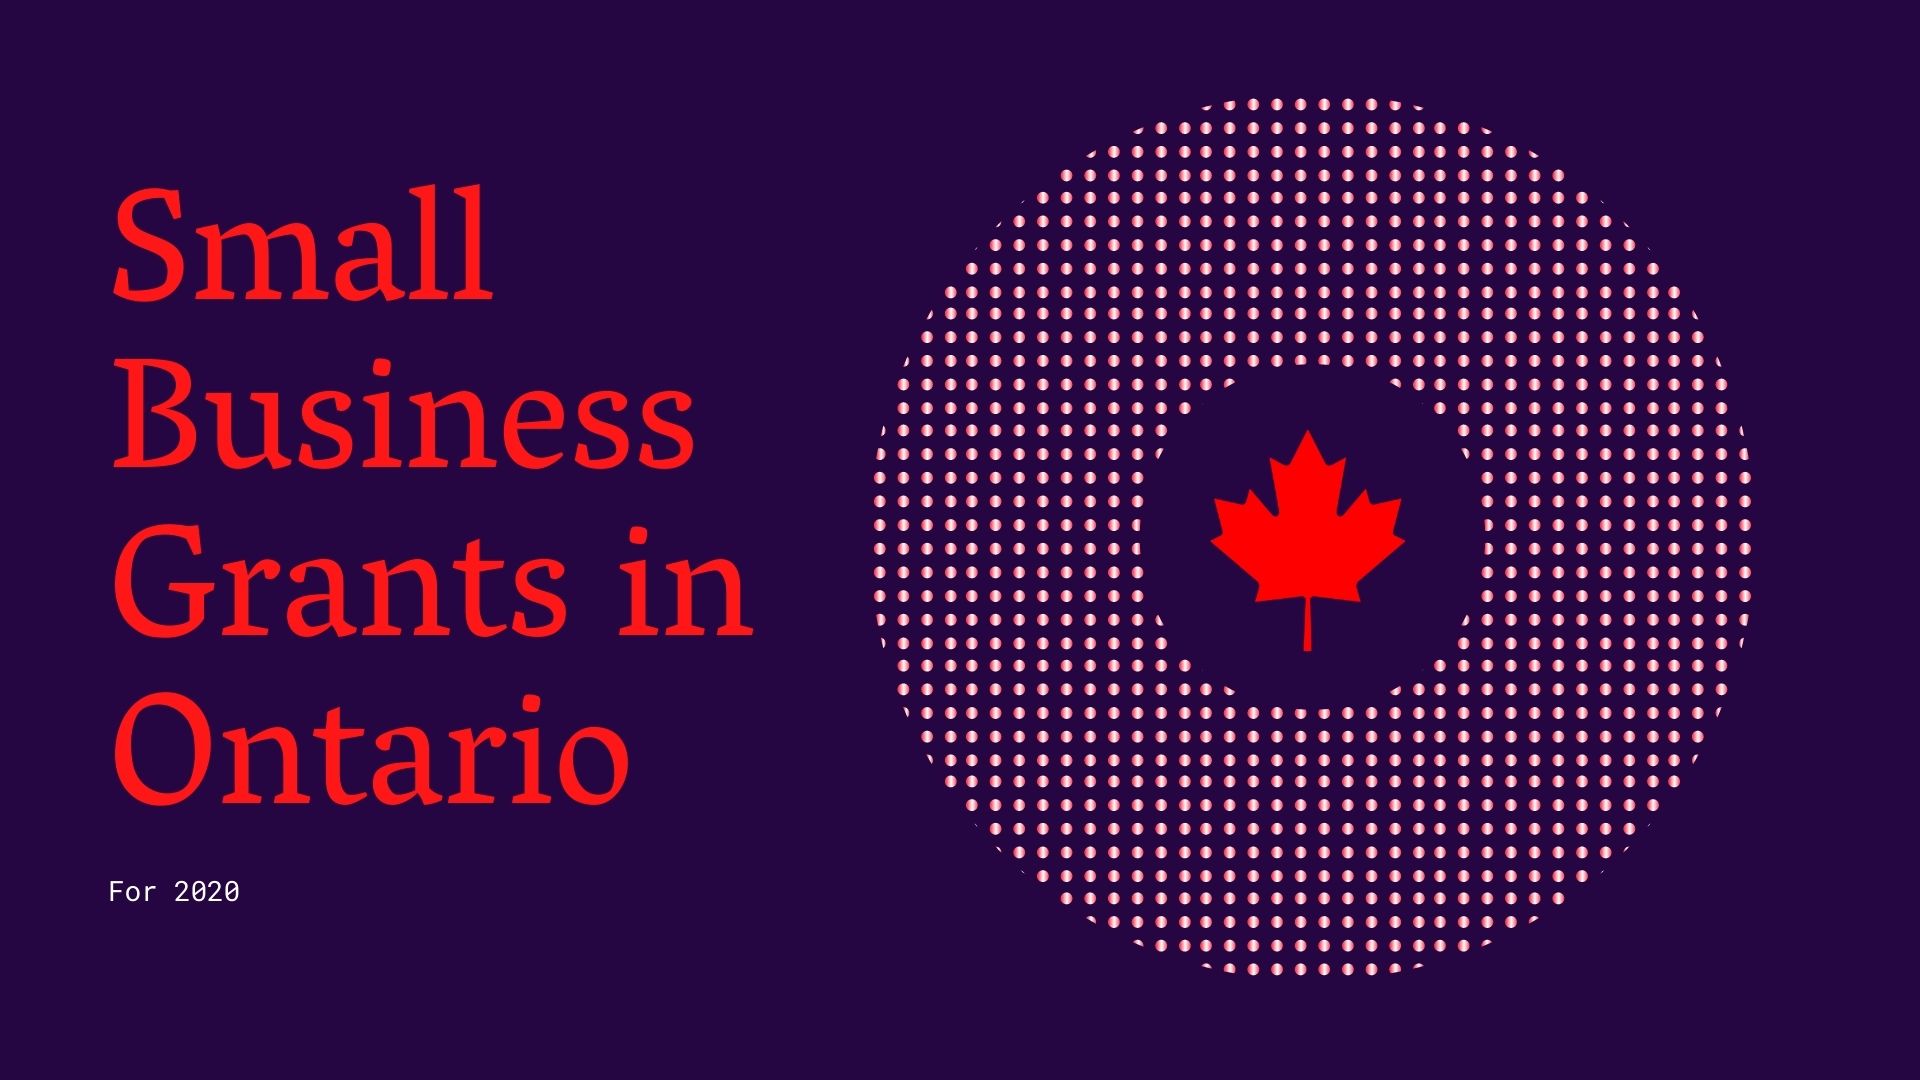 Small Business Grants in Ontario